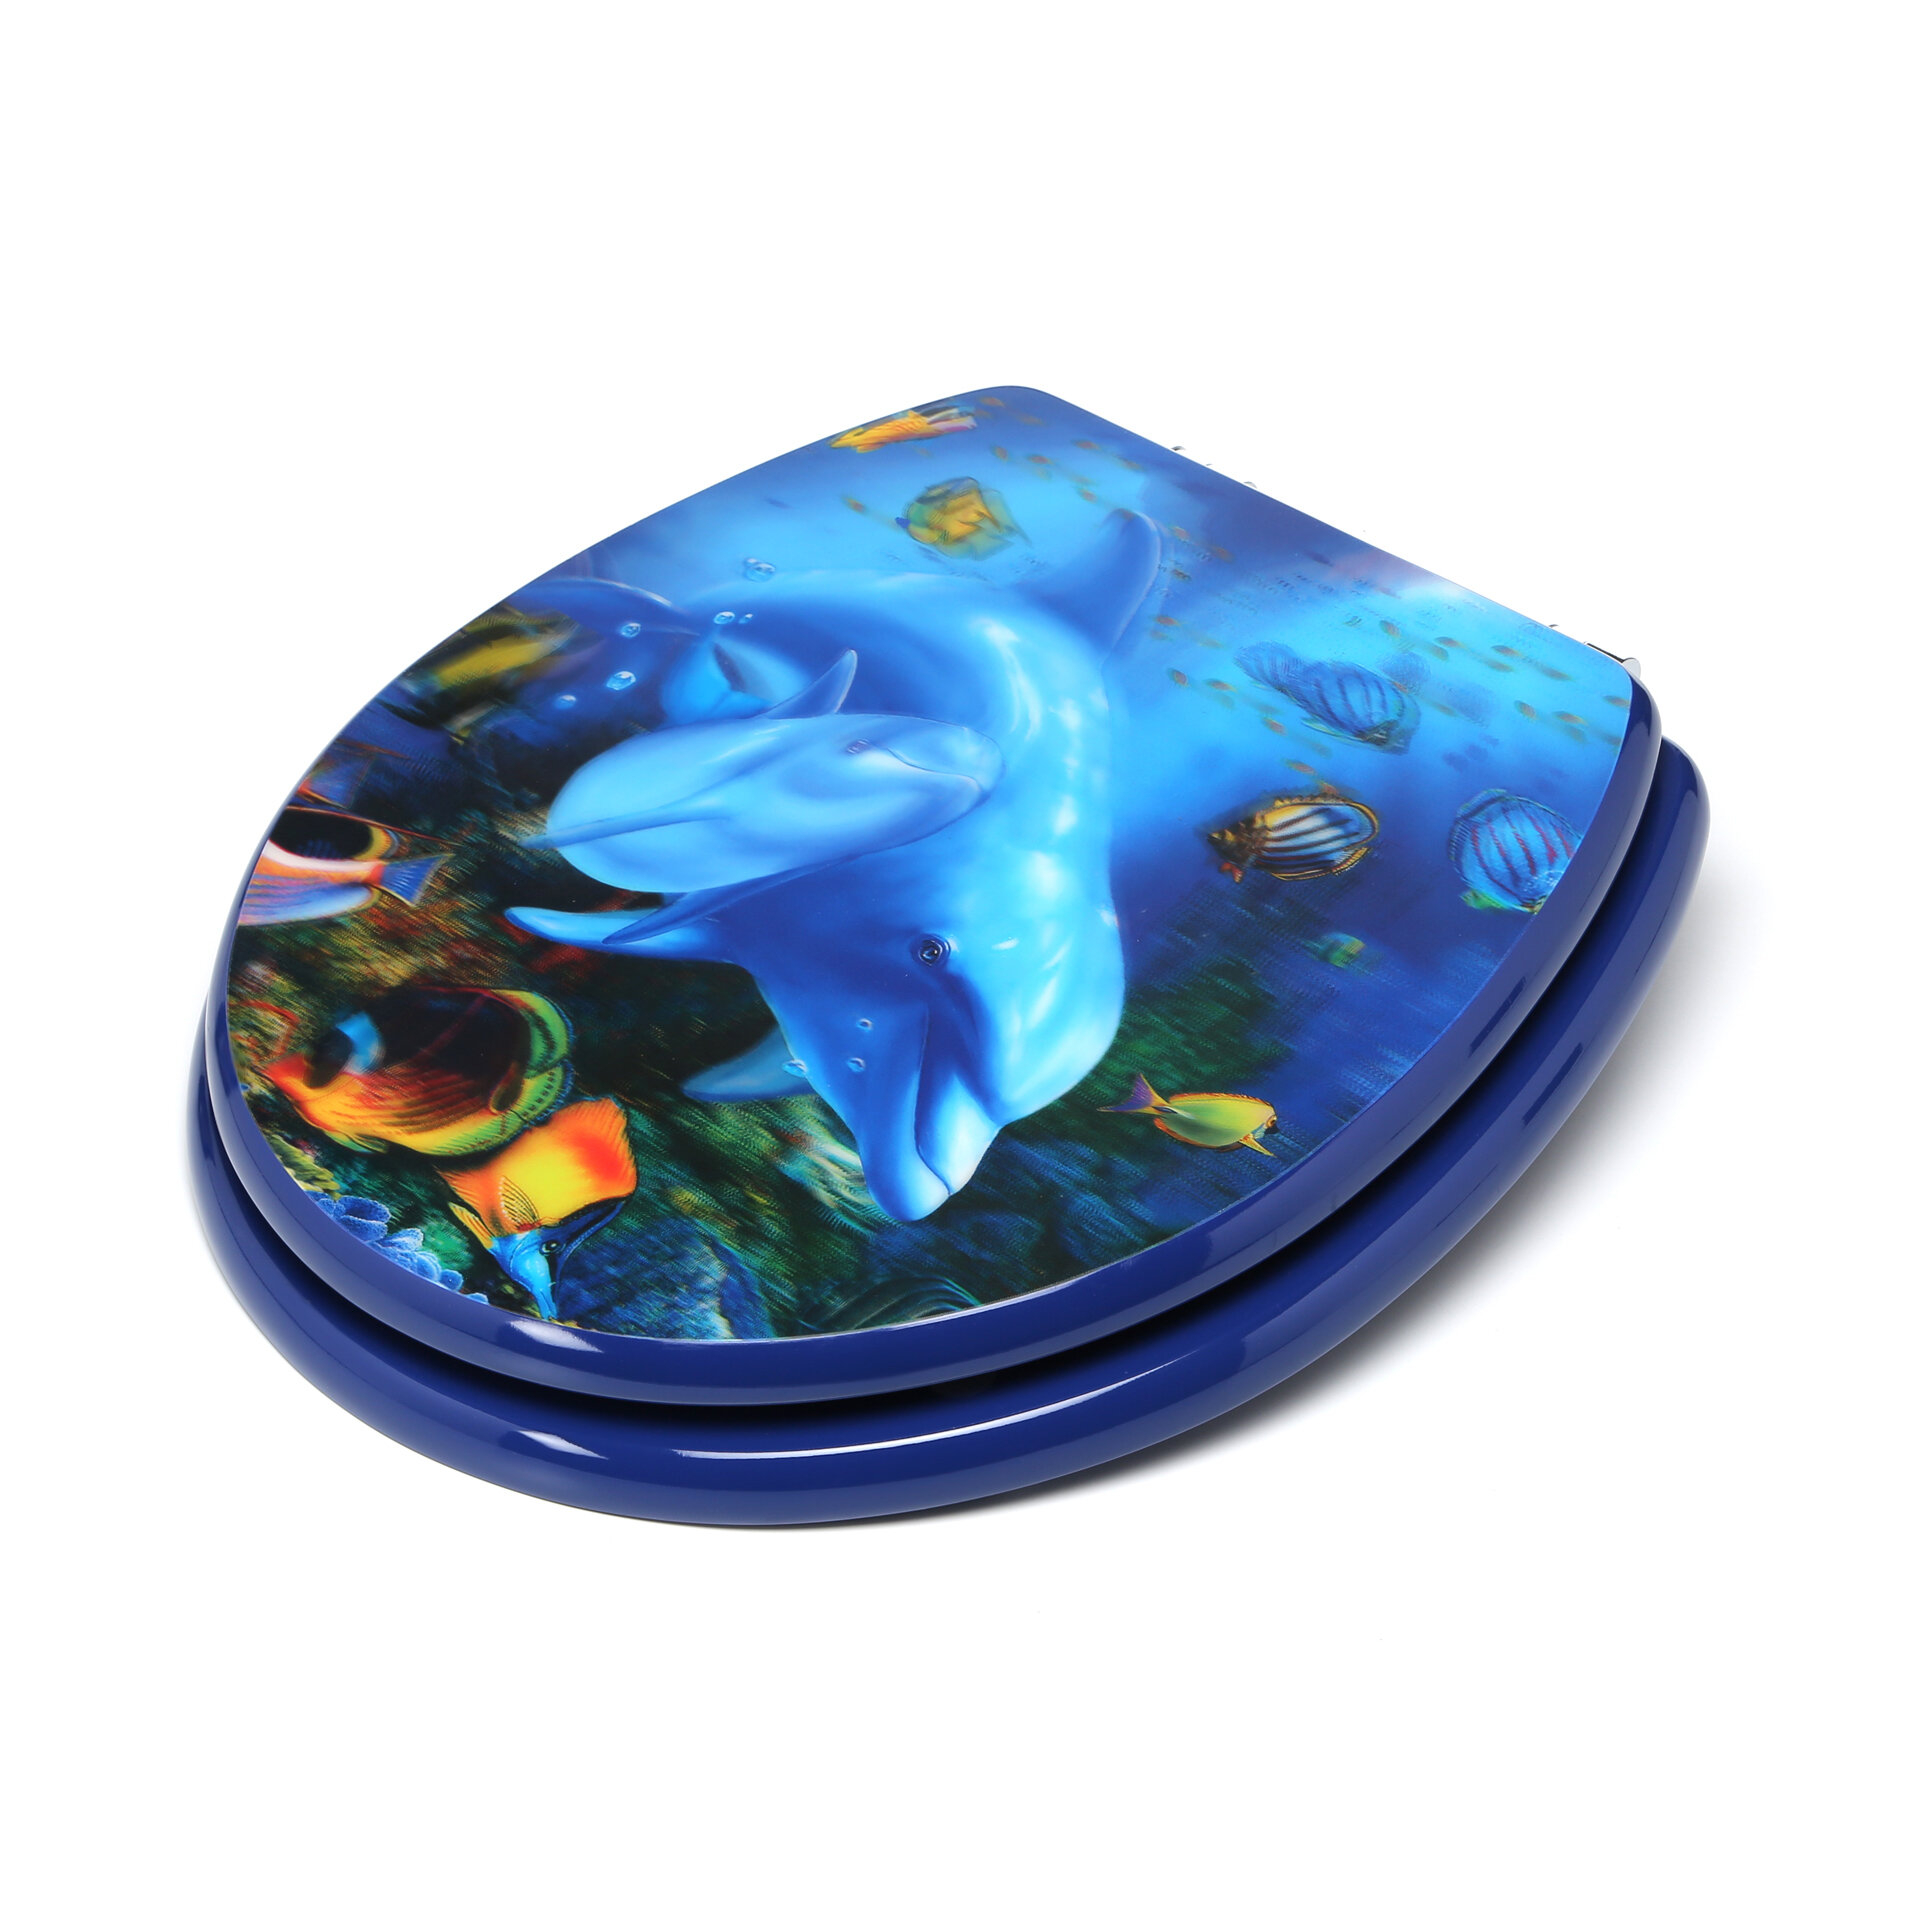 3D Ocean Series Dolphin Mother and Calf Round Toilet Seat